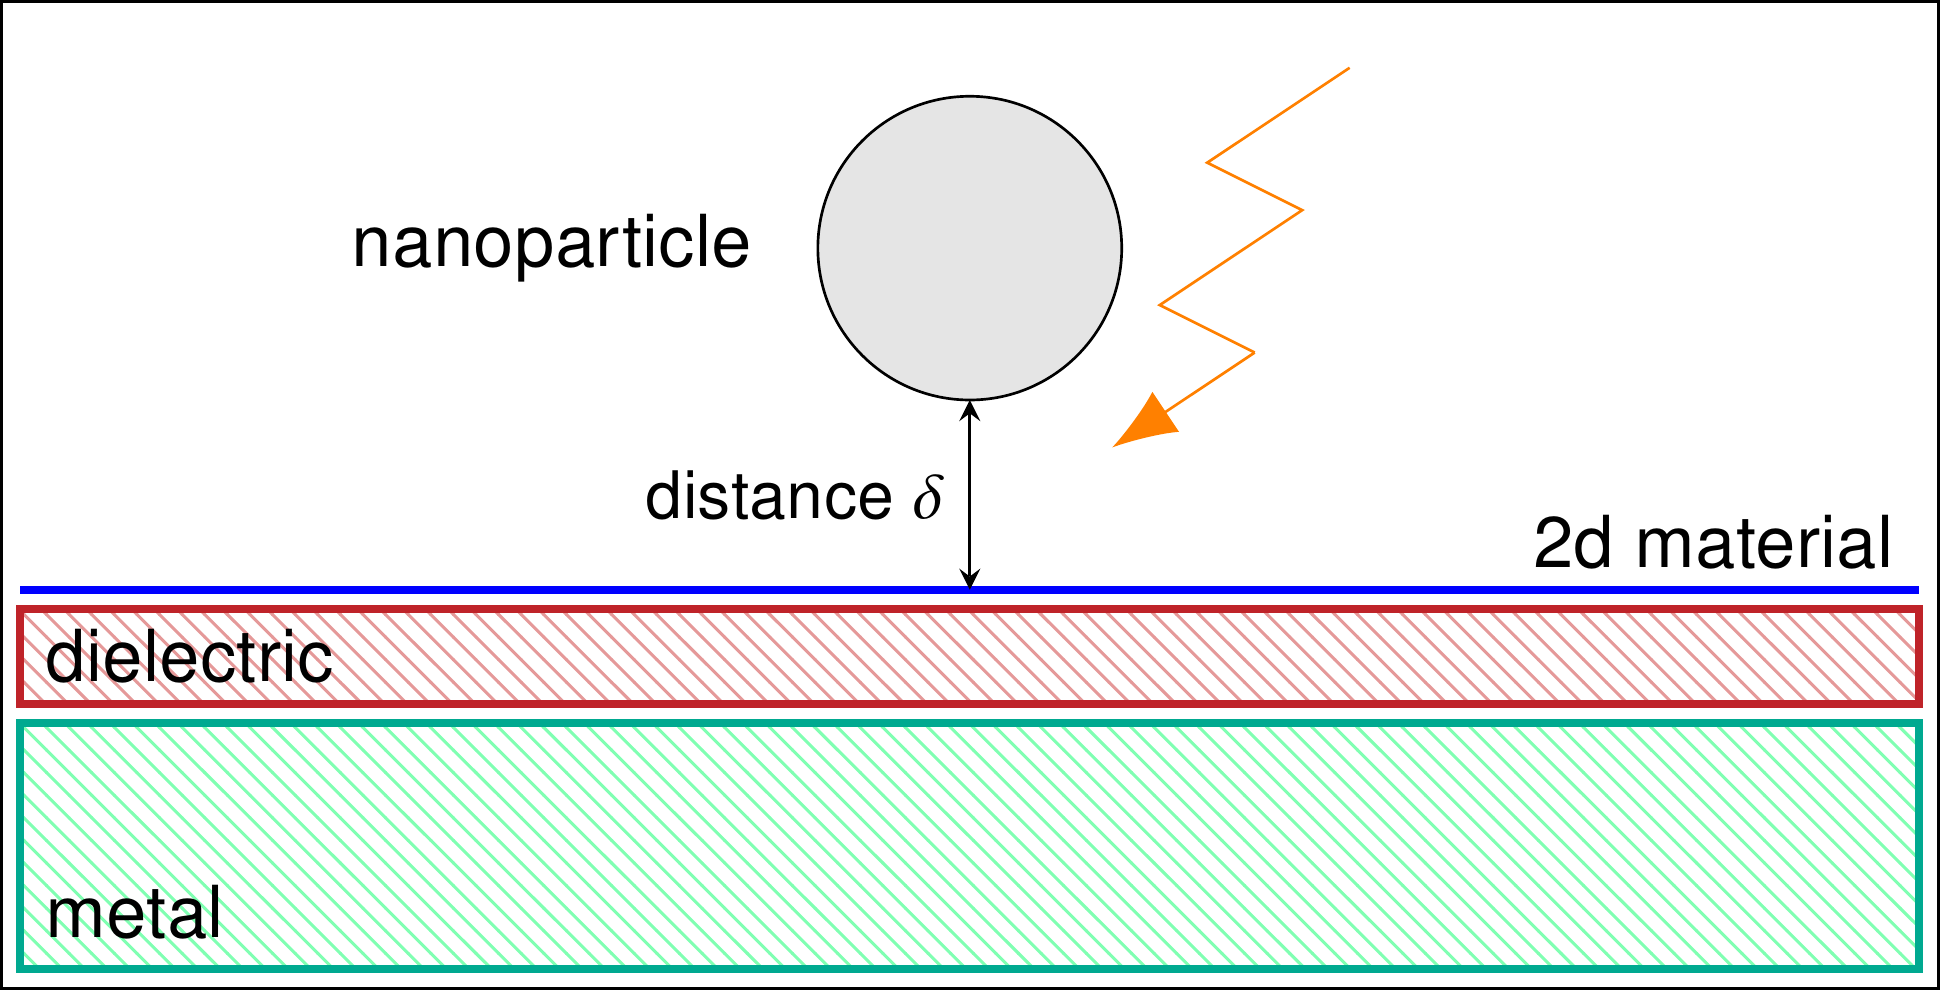 Sketch of the experiment setup, where the nanogap is caused by the metal ball on top of the dielectric and the metal, and a 2D material placed in between.